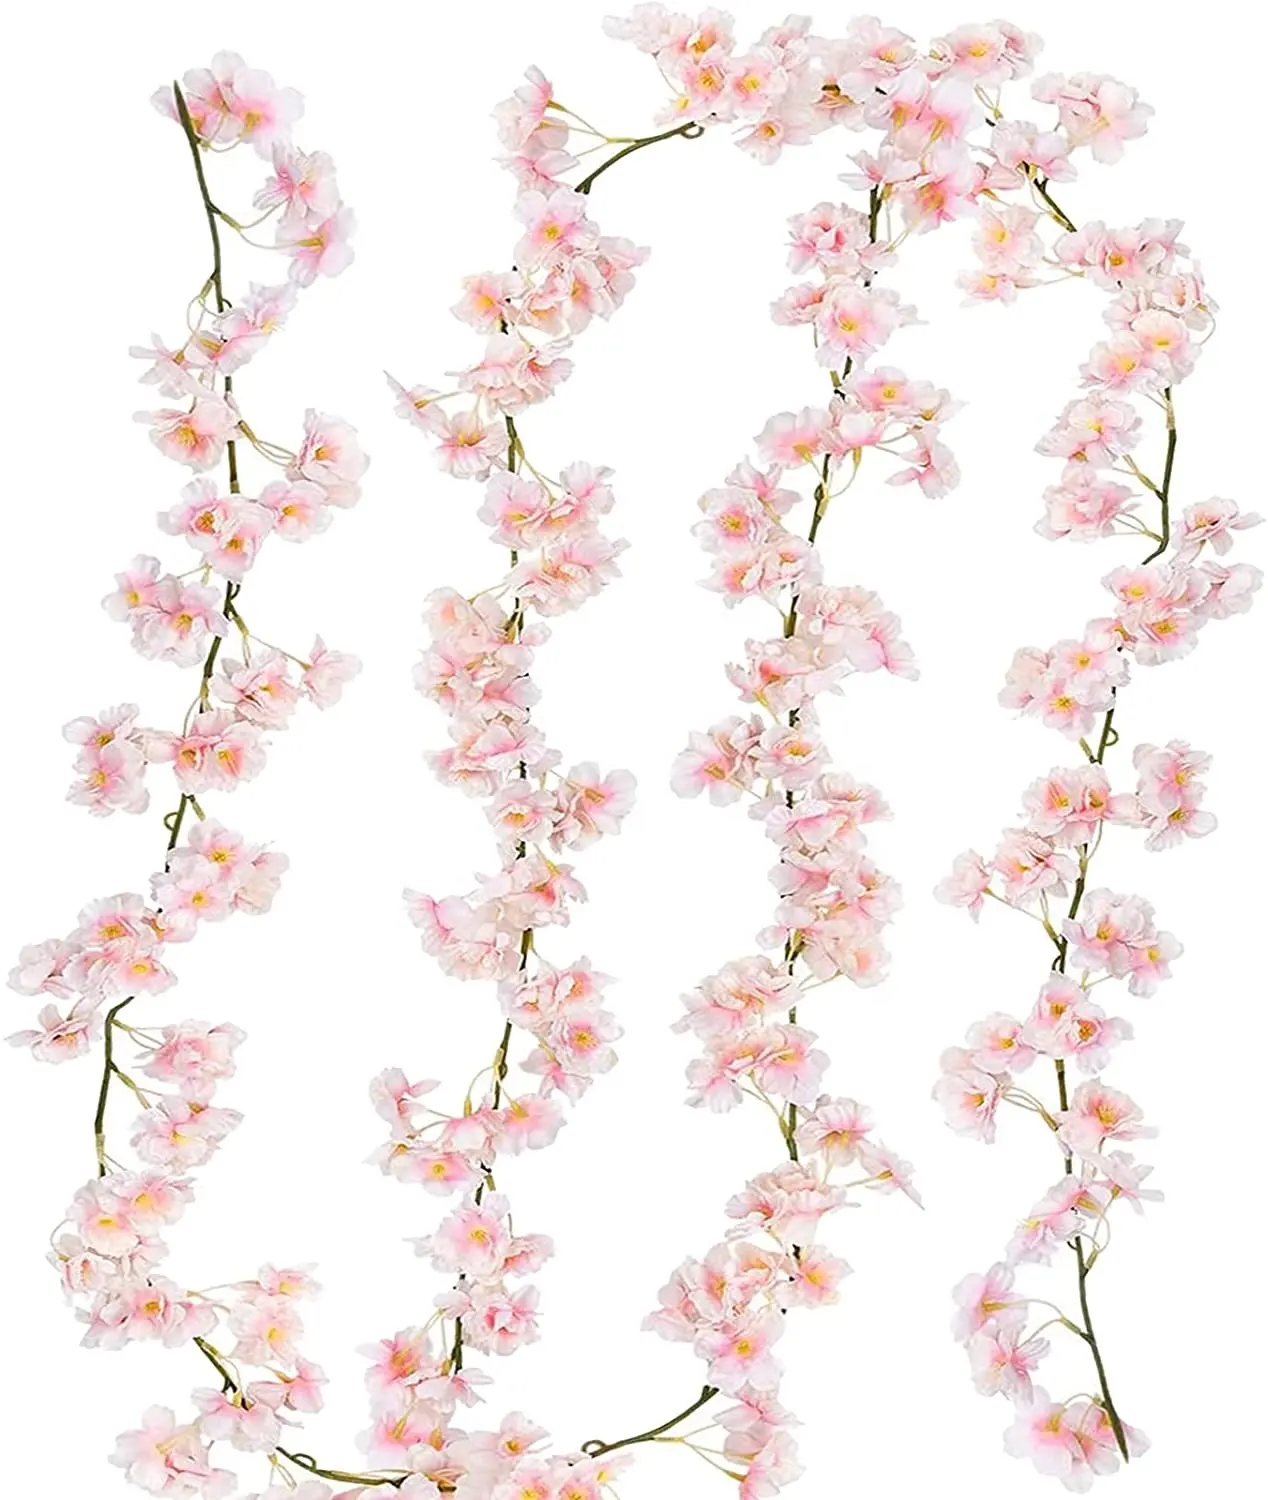 Searching for agent 1.8m length indoor wedding decoration artificial cherry blossom hanging vines sakura flower garland